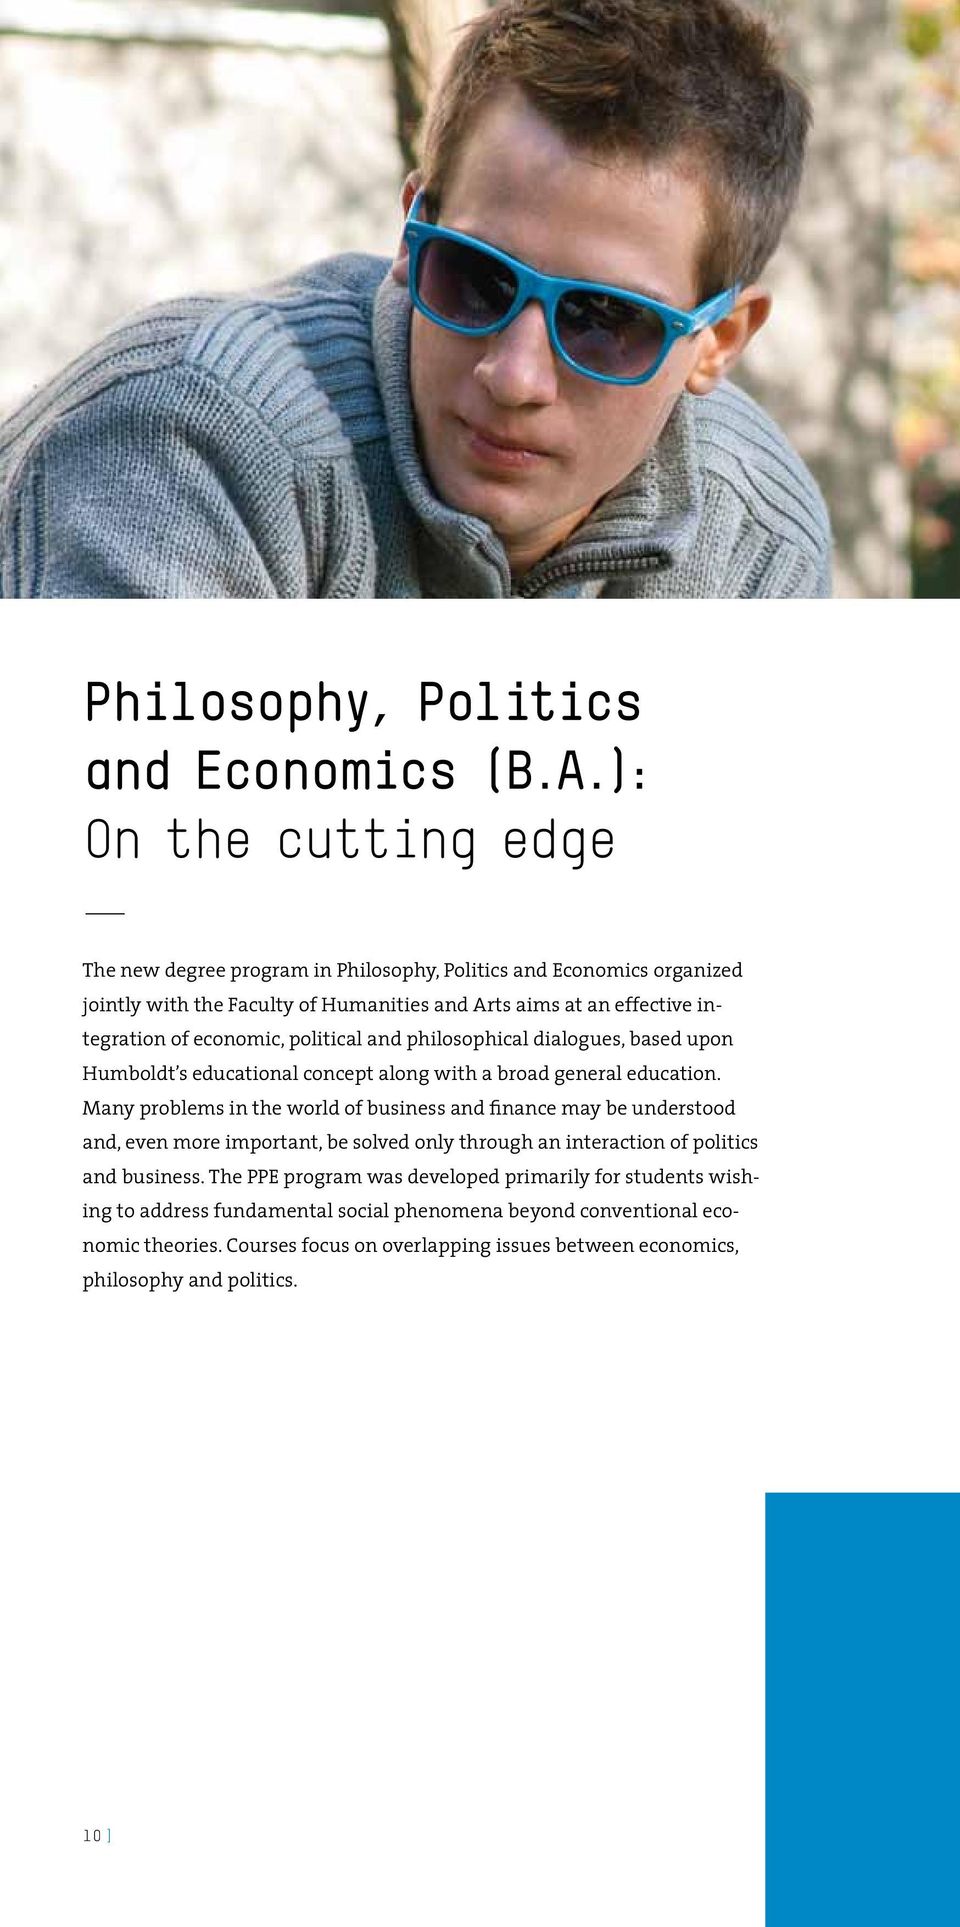 economic, political and philosophical dialogues, based upon Humboldt s educational concept along with a broad general education.